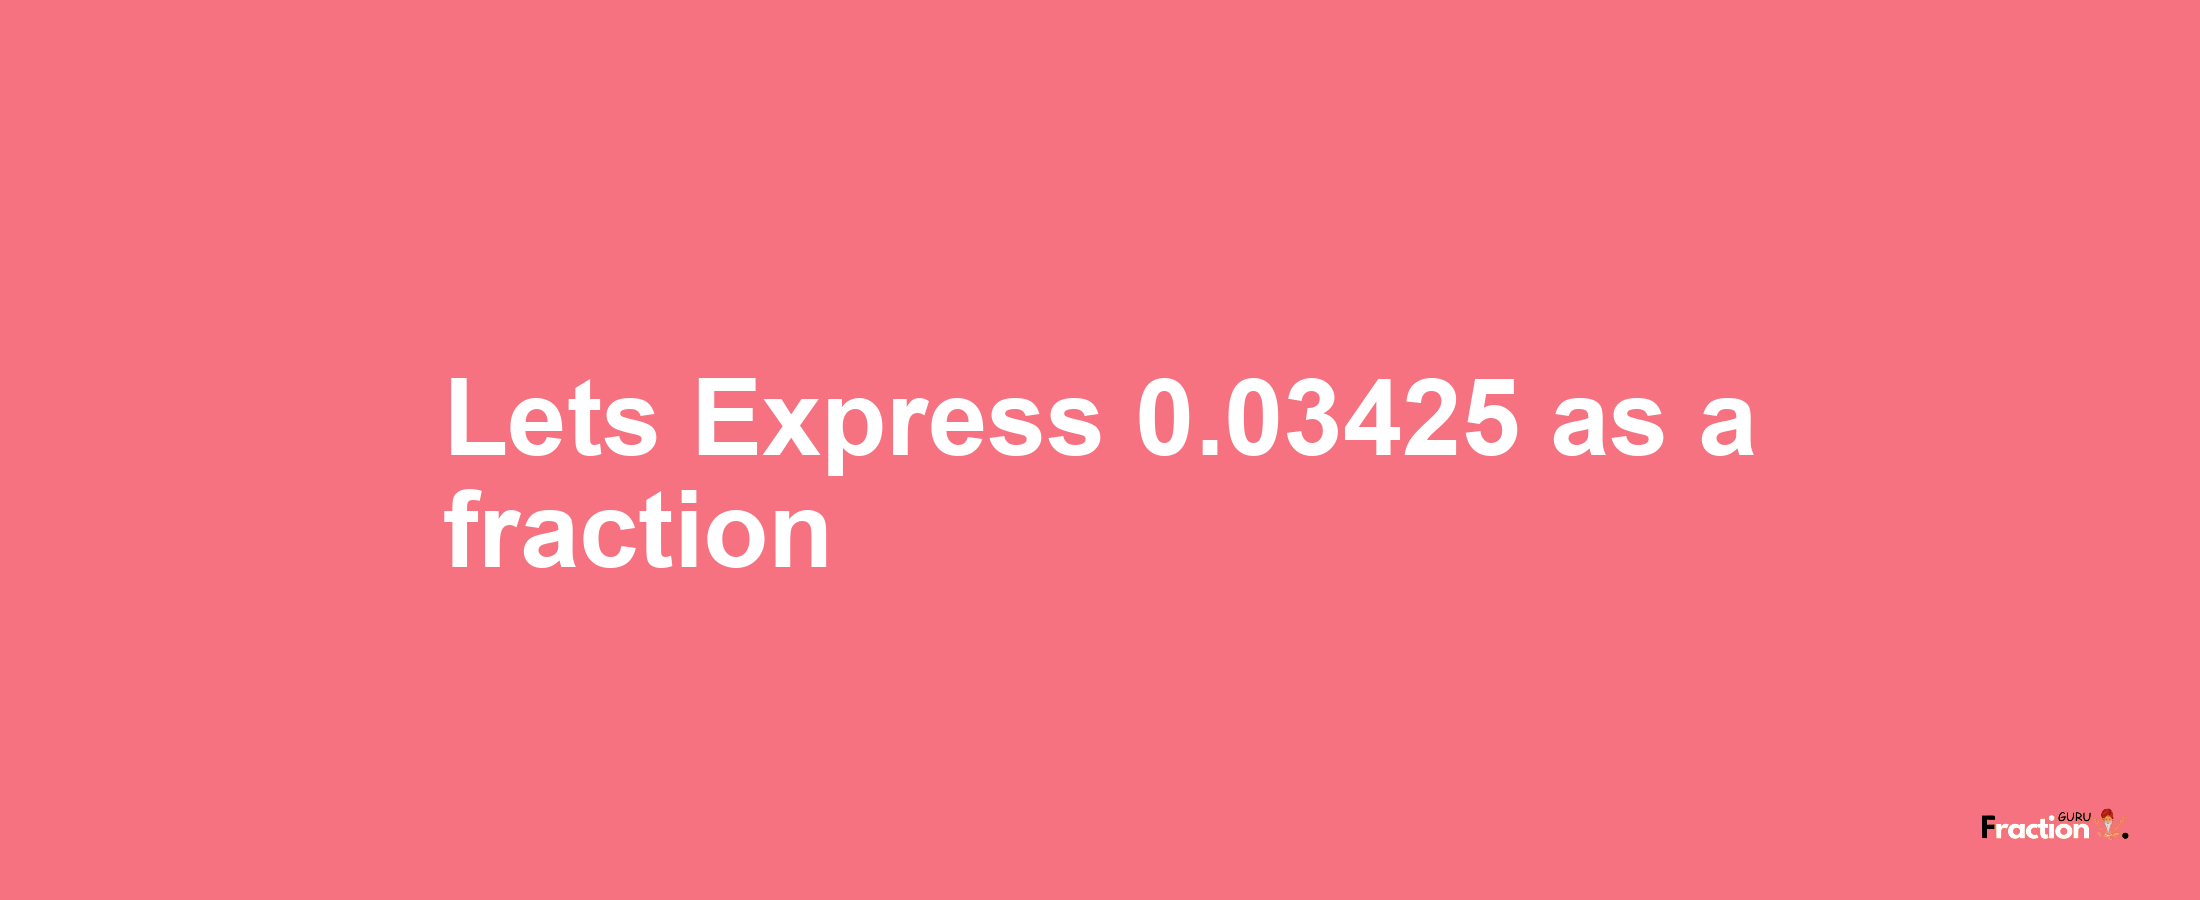 Lets Express 0.03425 as afraction